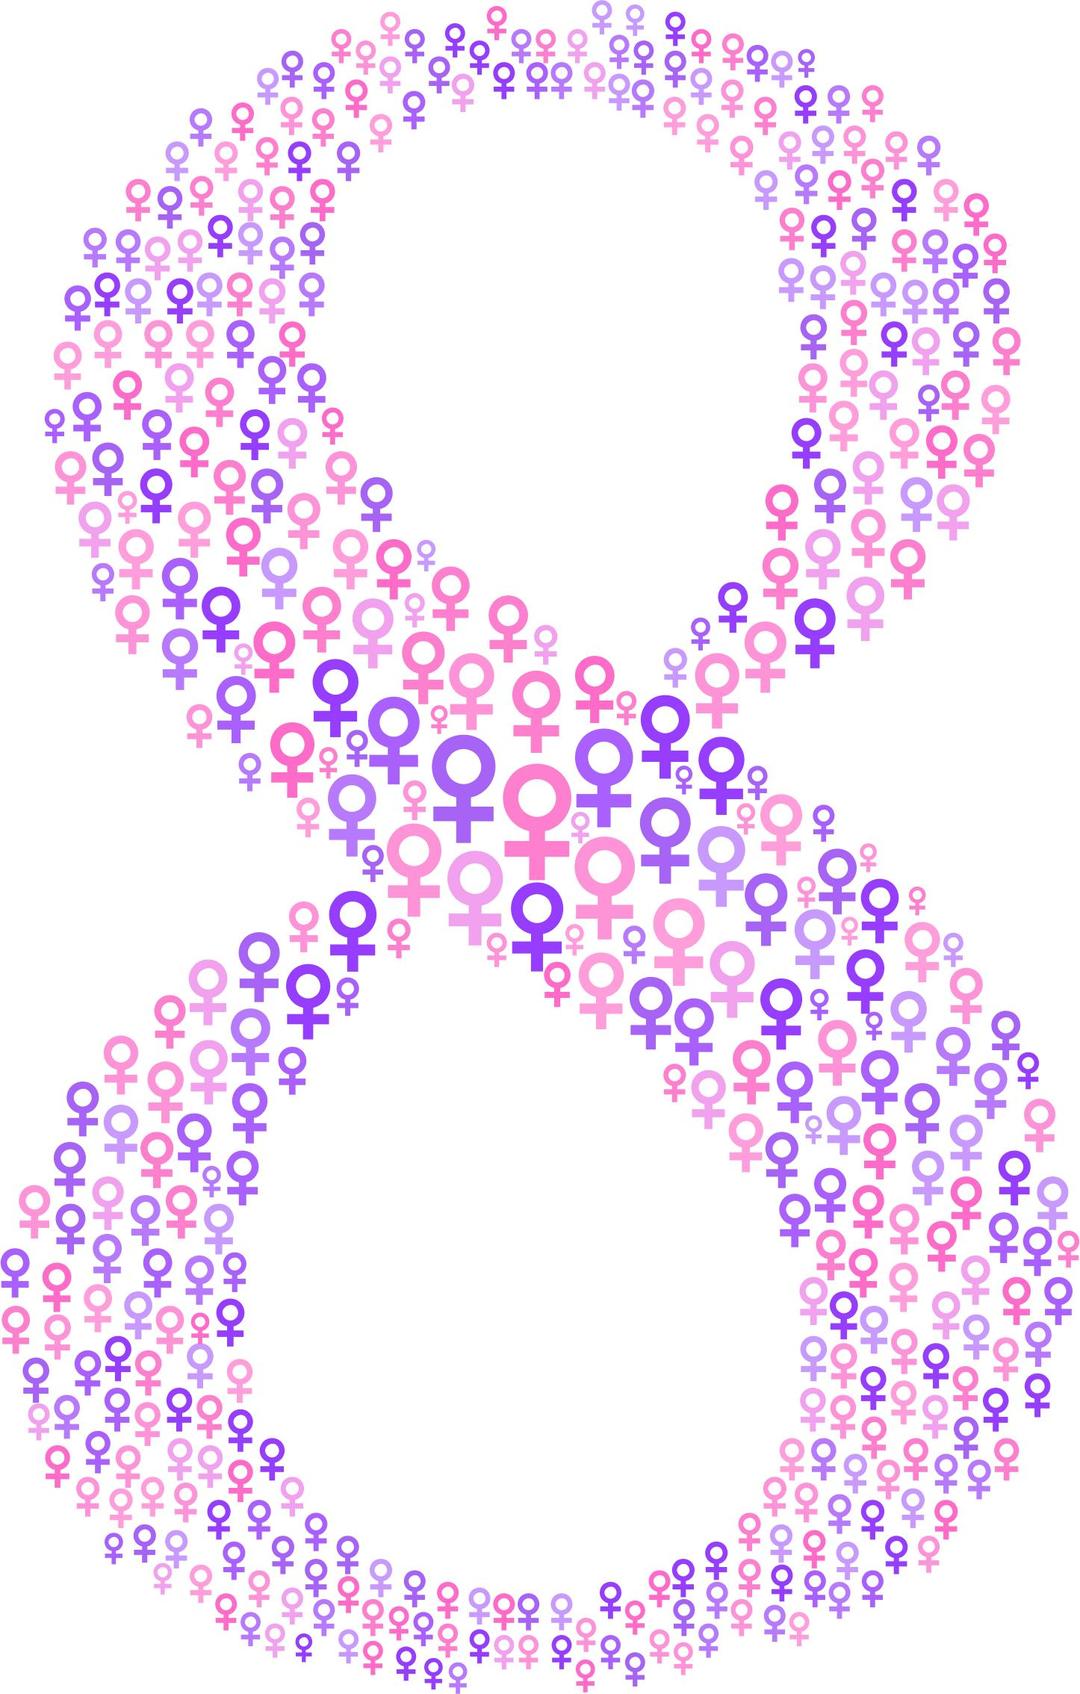 Women's Day March 8th Female Symbol png transparent